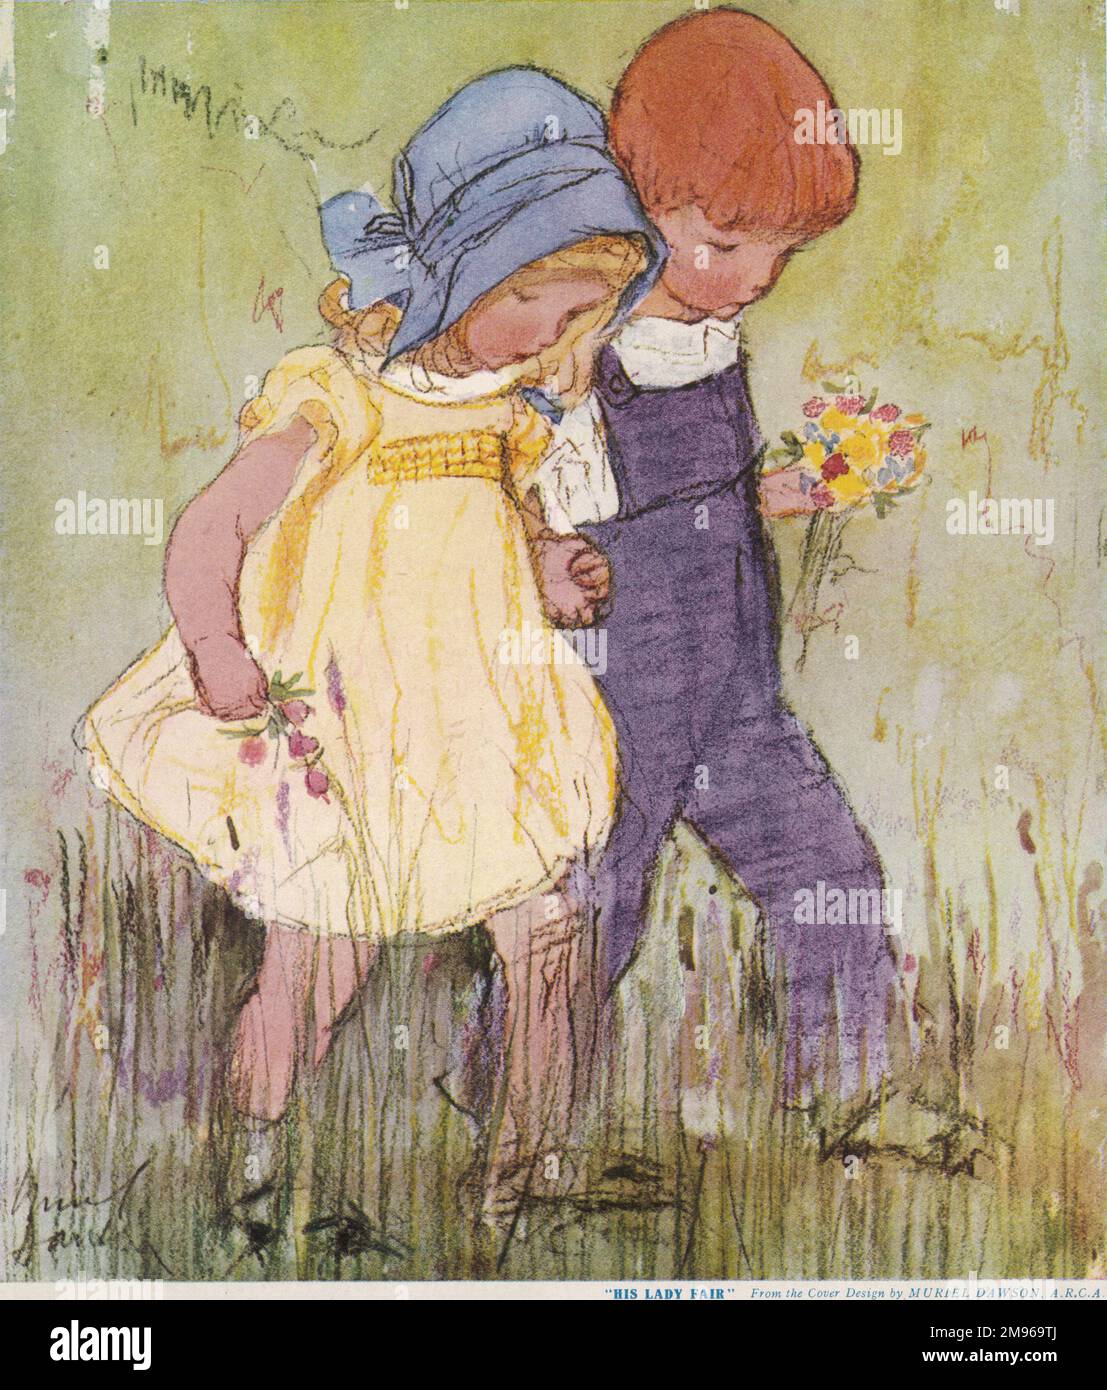 A little boy and girl walk hand in hand through a field, each holding a bunch of wild flowers. Stock Photo